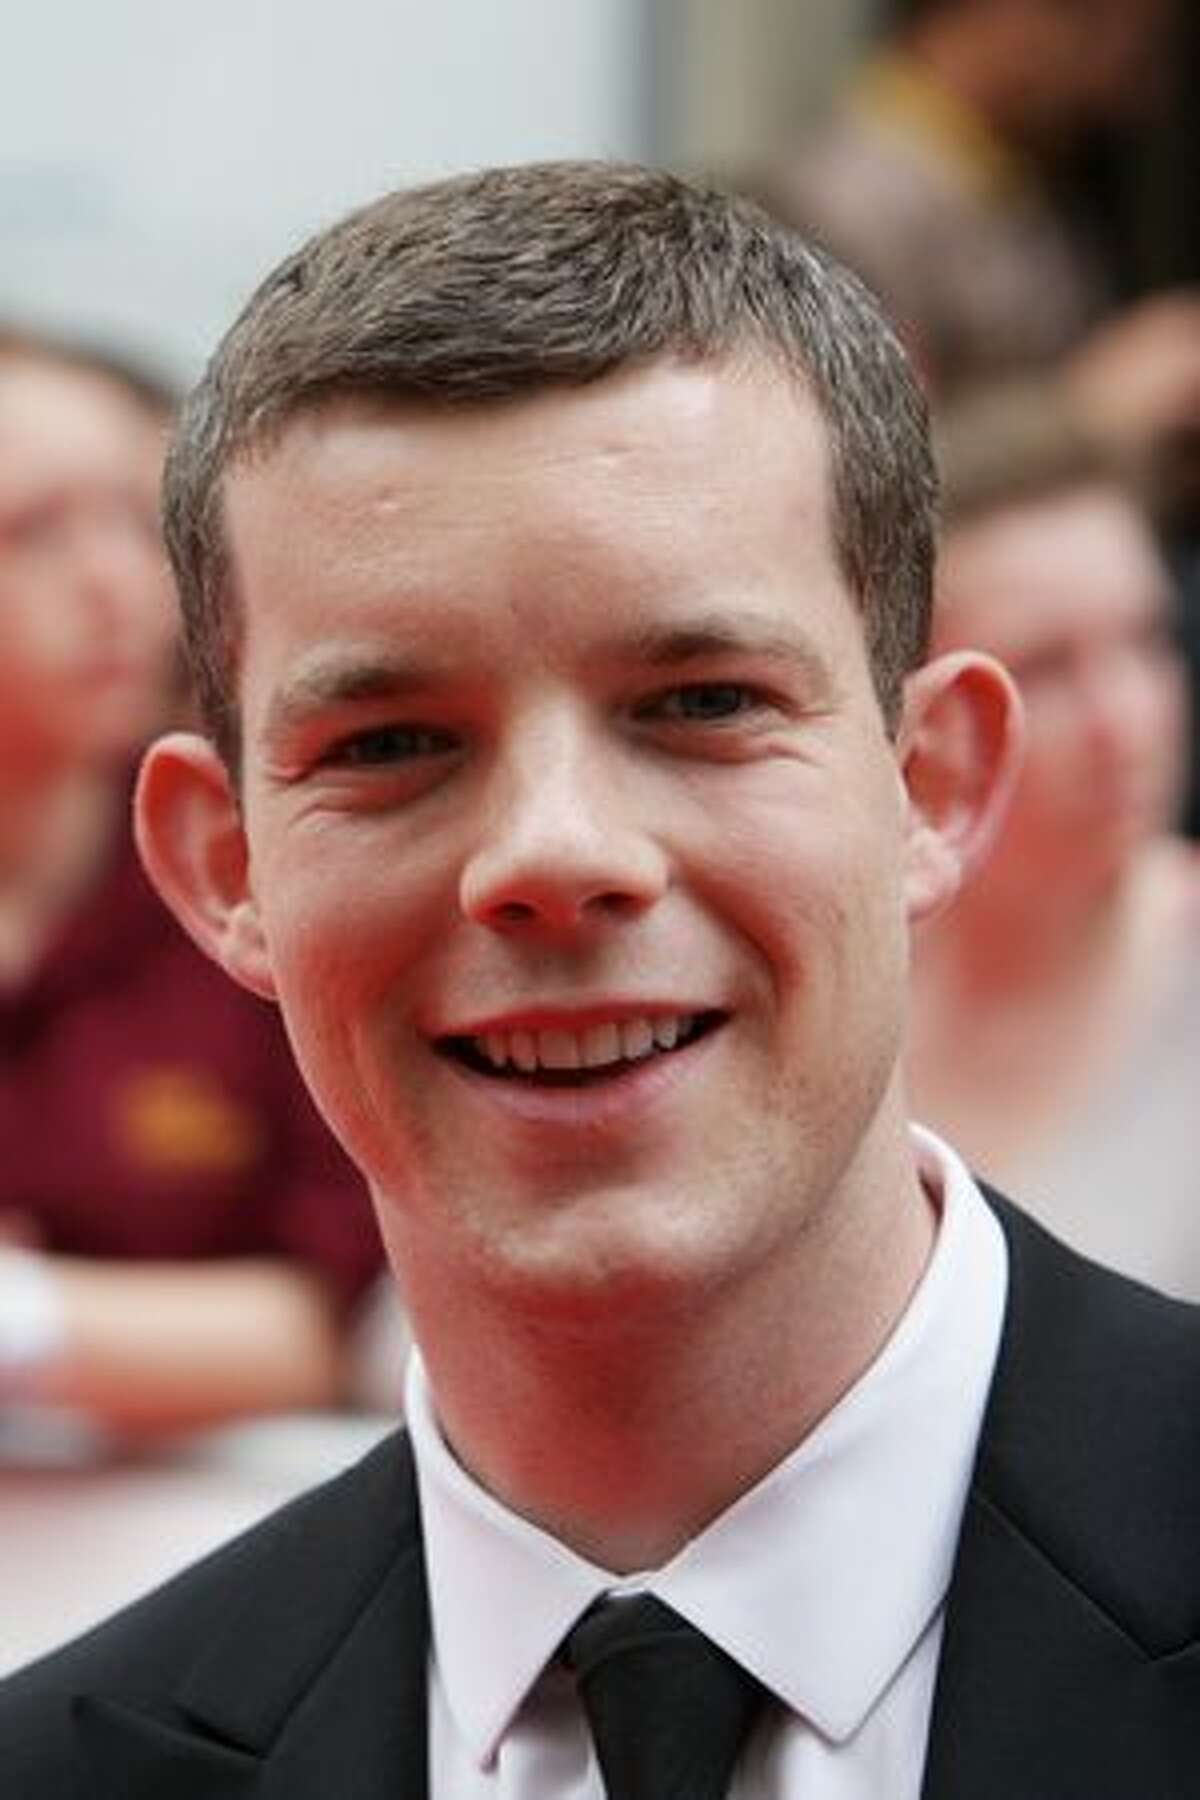 Russell Tovey arrives at The Philips British Academy Television Awards held at The Palladium.